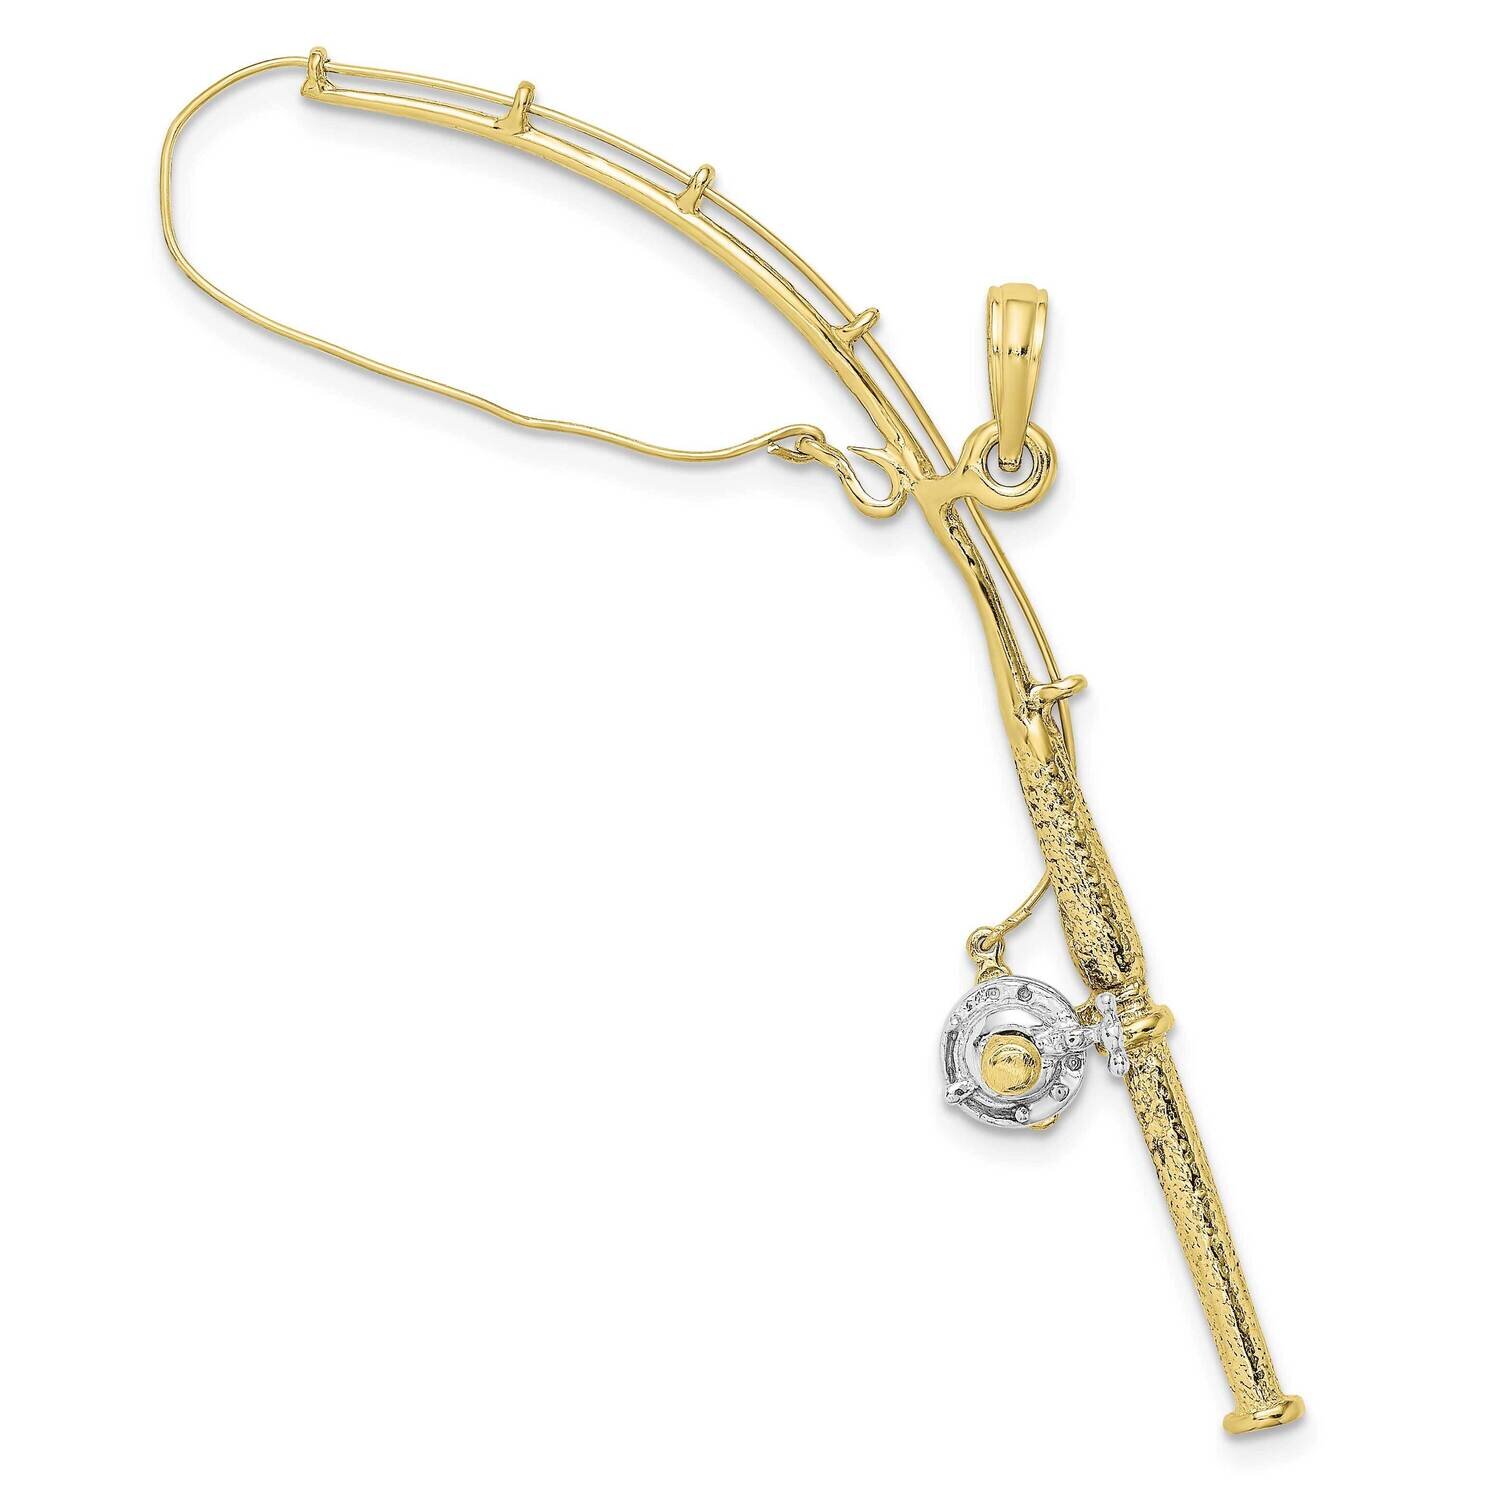 3-D Moveable Fishing Pole with Reel Pendant 10k Gold & Rhodium 10K9051